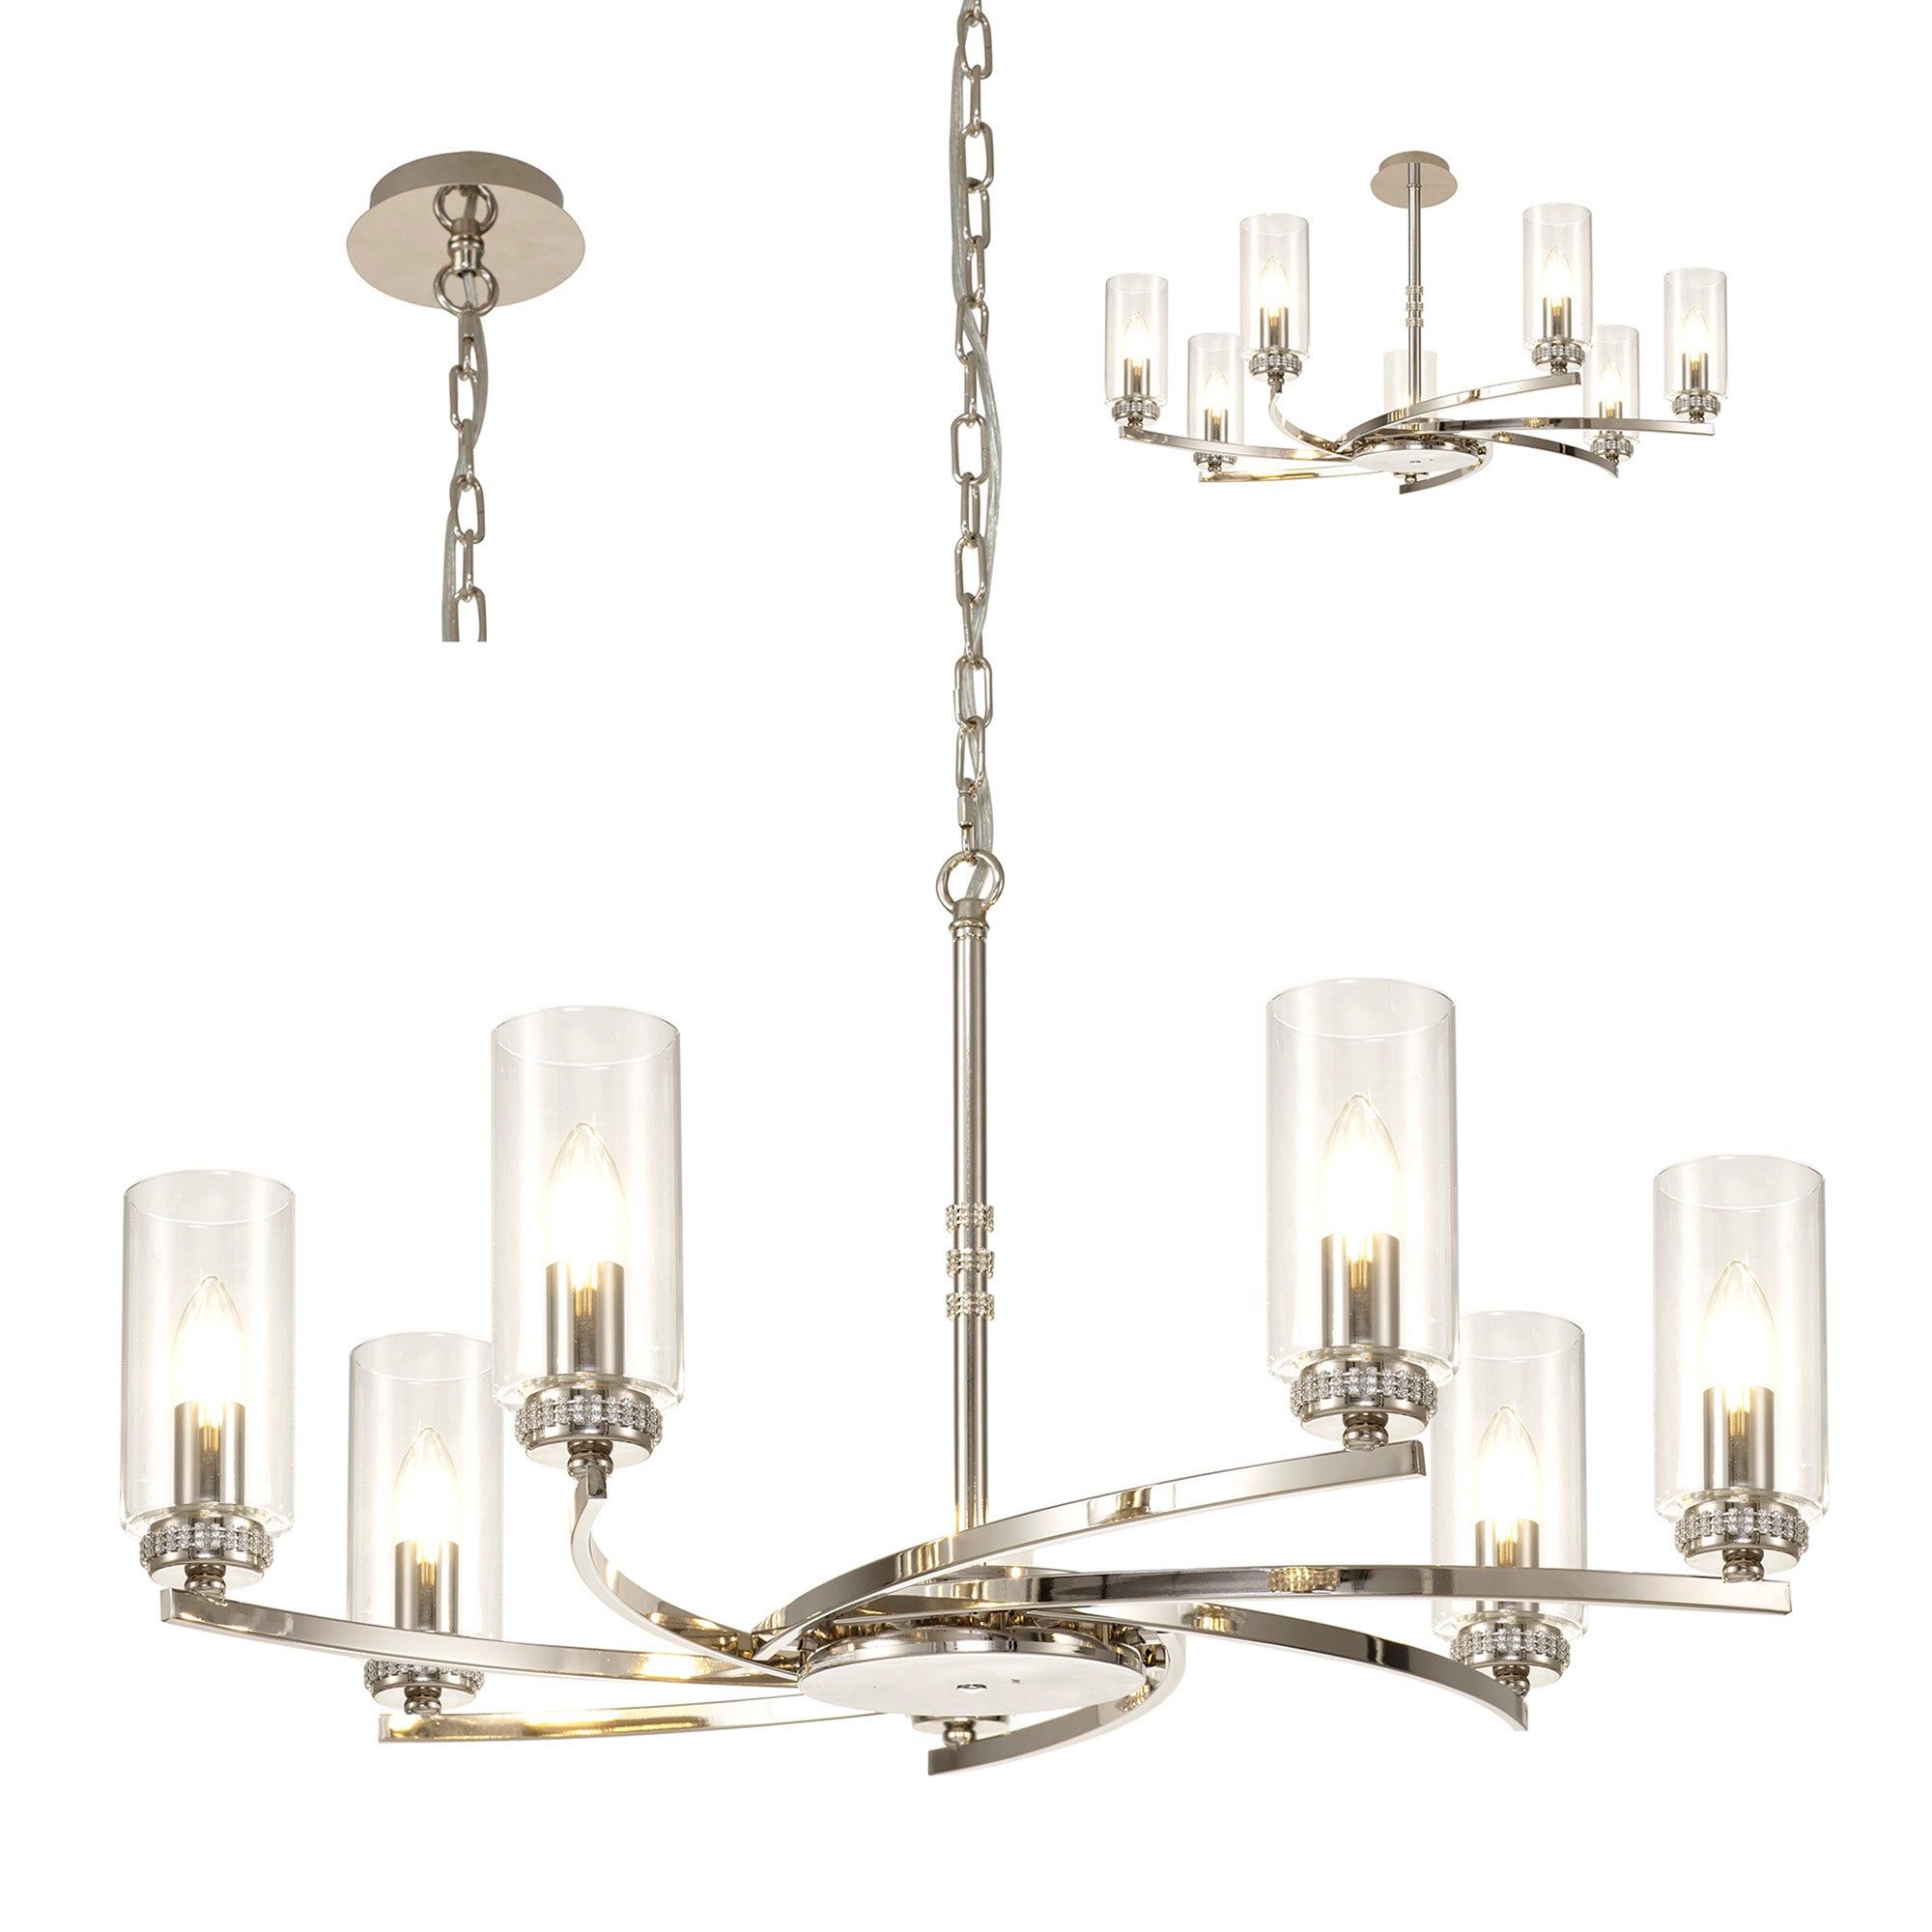 Deck Pendant/Semi Ceiling, 7 x E14, Antique Brass, Polished Nickel, Polished Gold